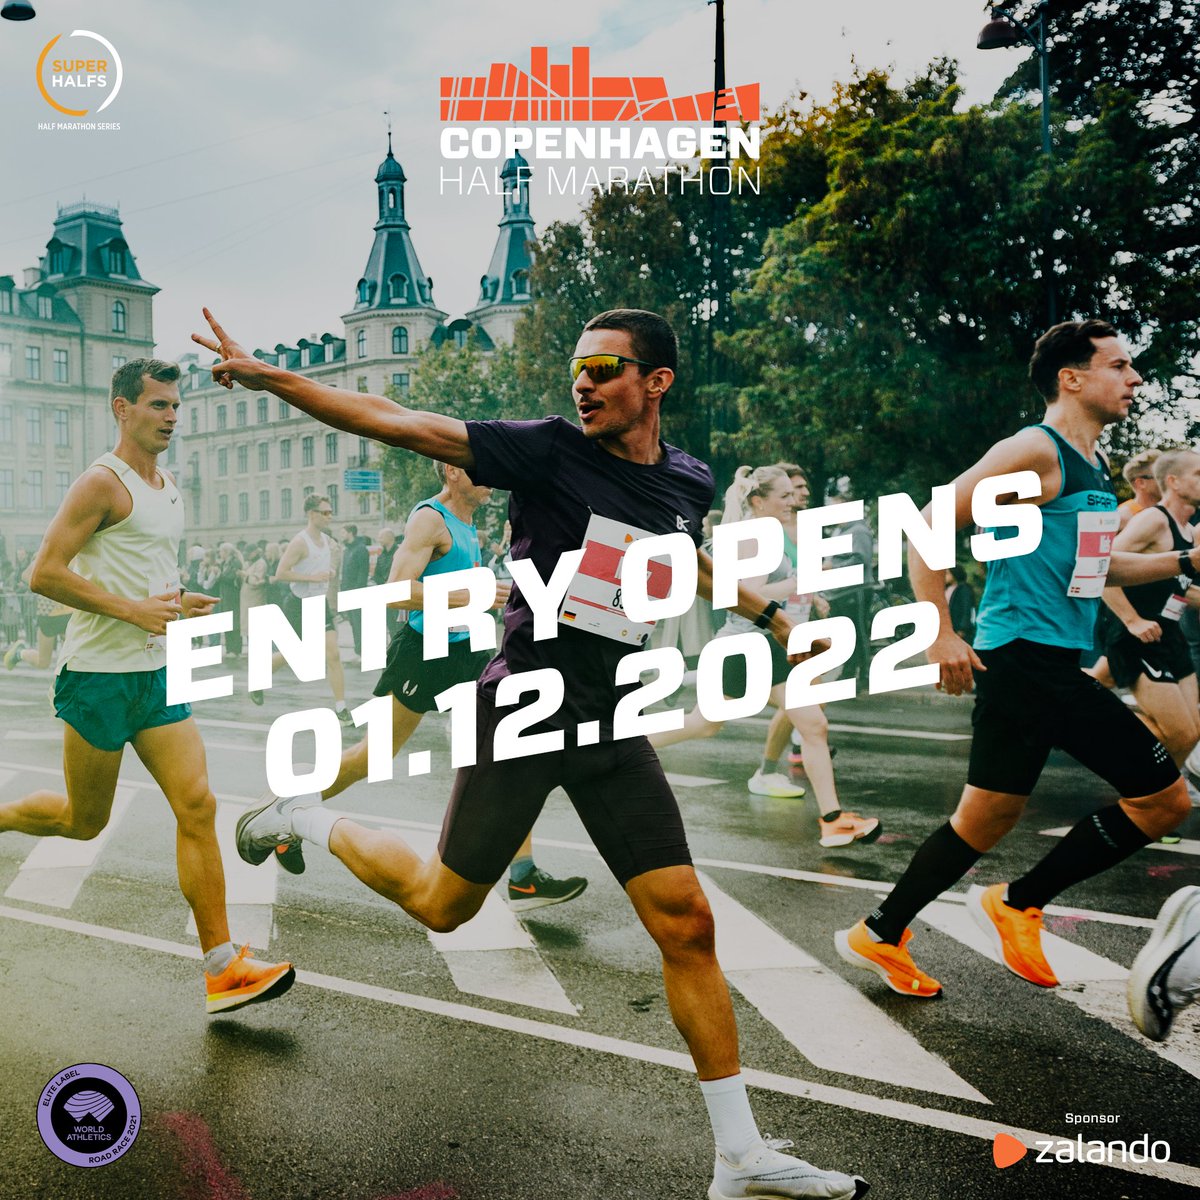 REGISTRATION OPENS 1st OF DECEMBER! ⚡ Next year's date is 17th of September, 2023! #cphhalf #superhalfs